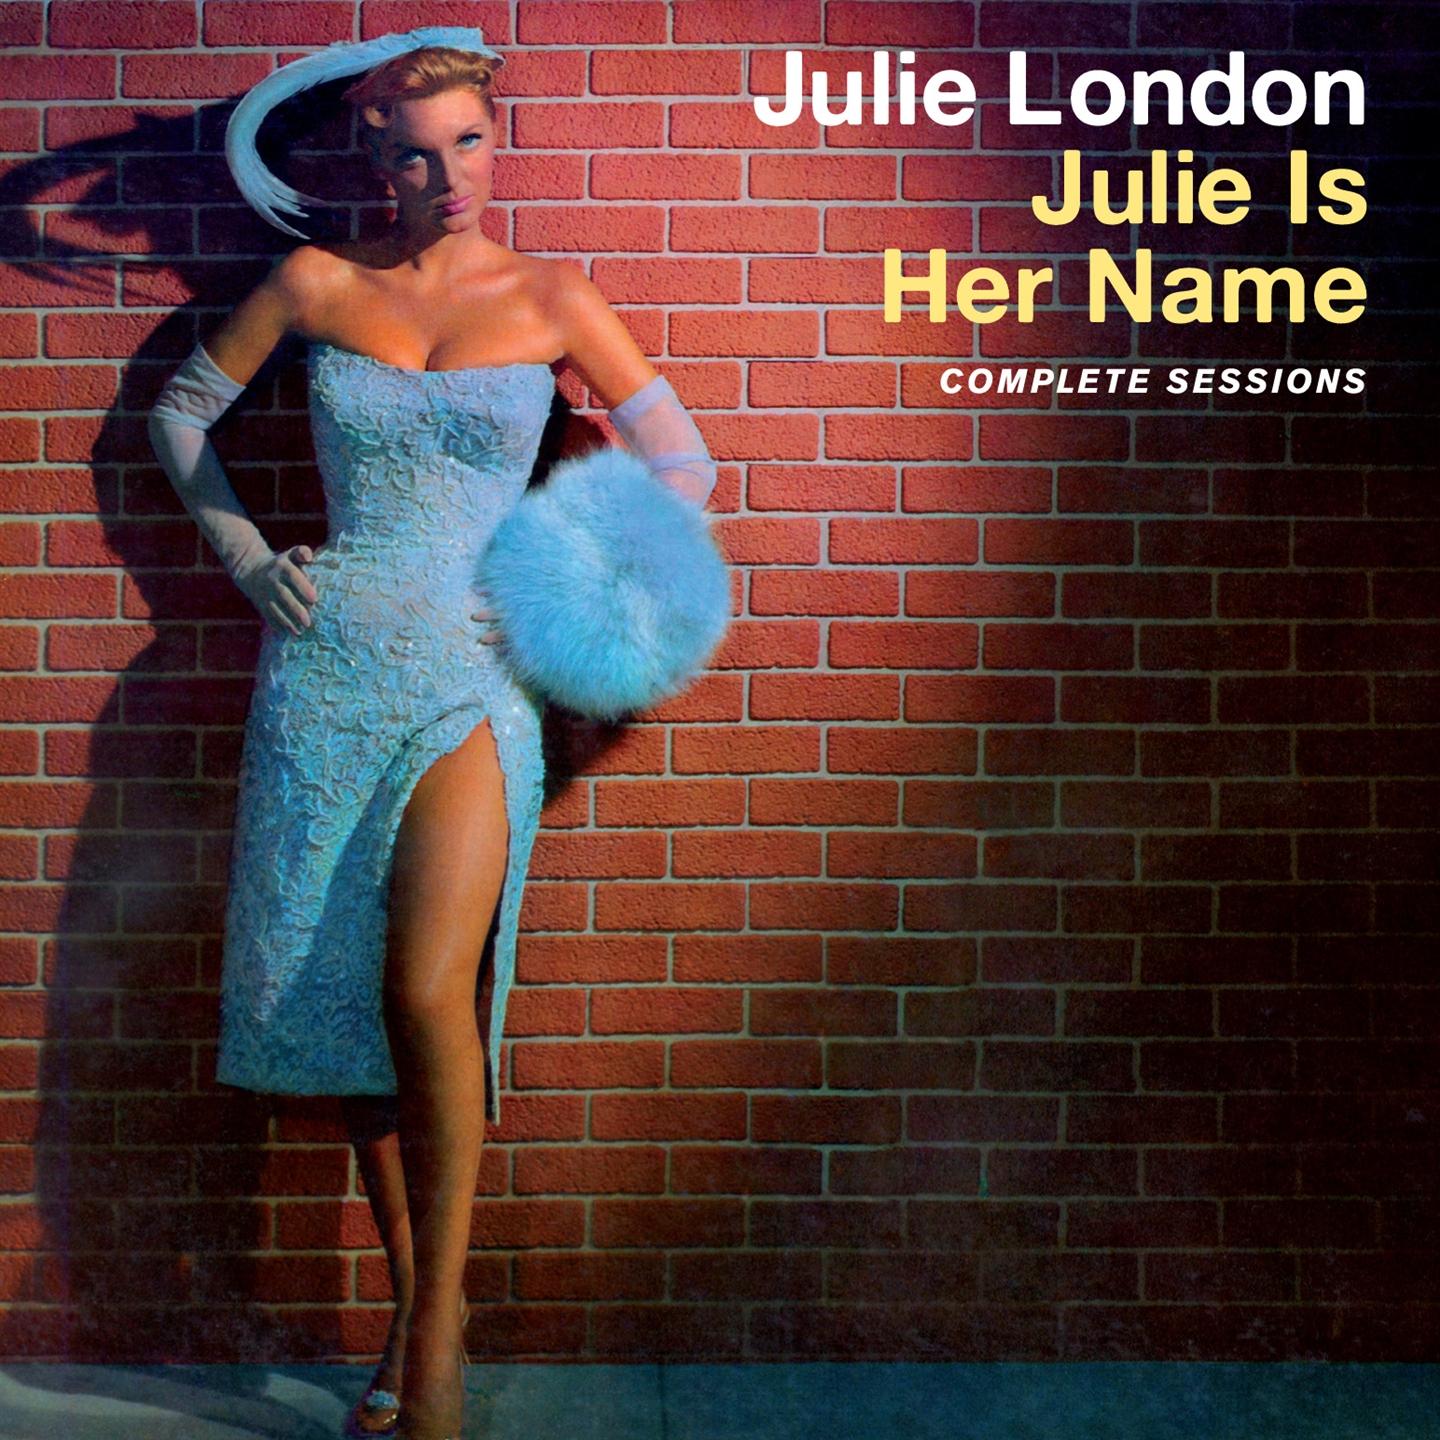 JULIE IS HER NAME - THE COMPLETE SESSIONS